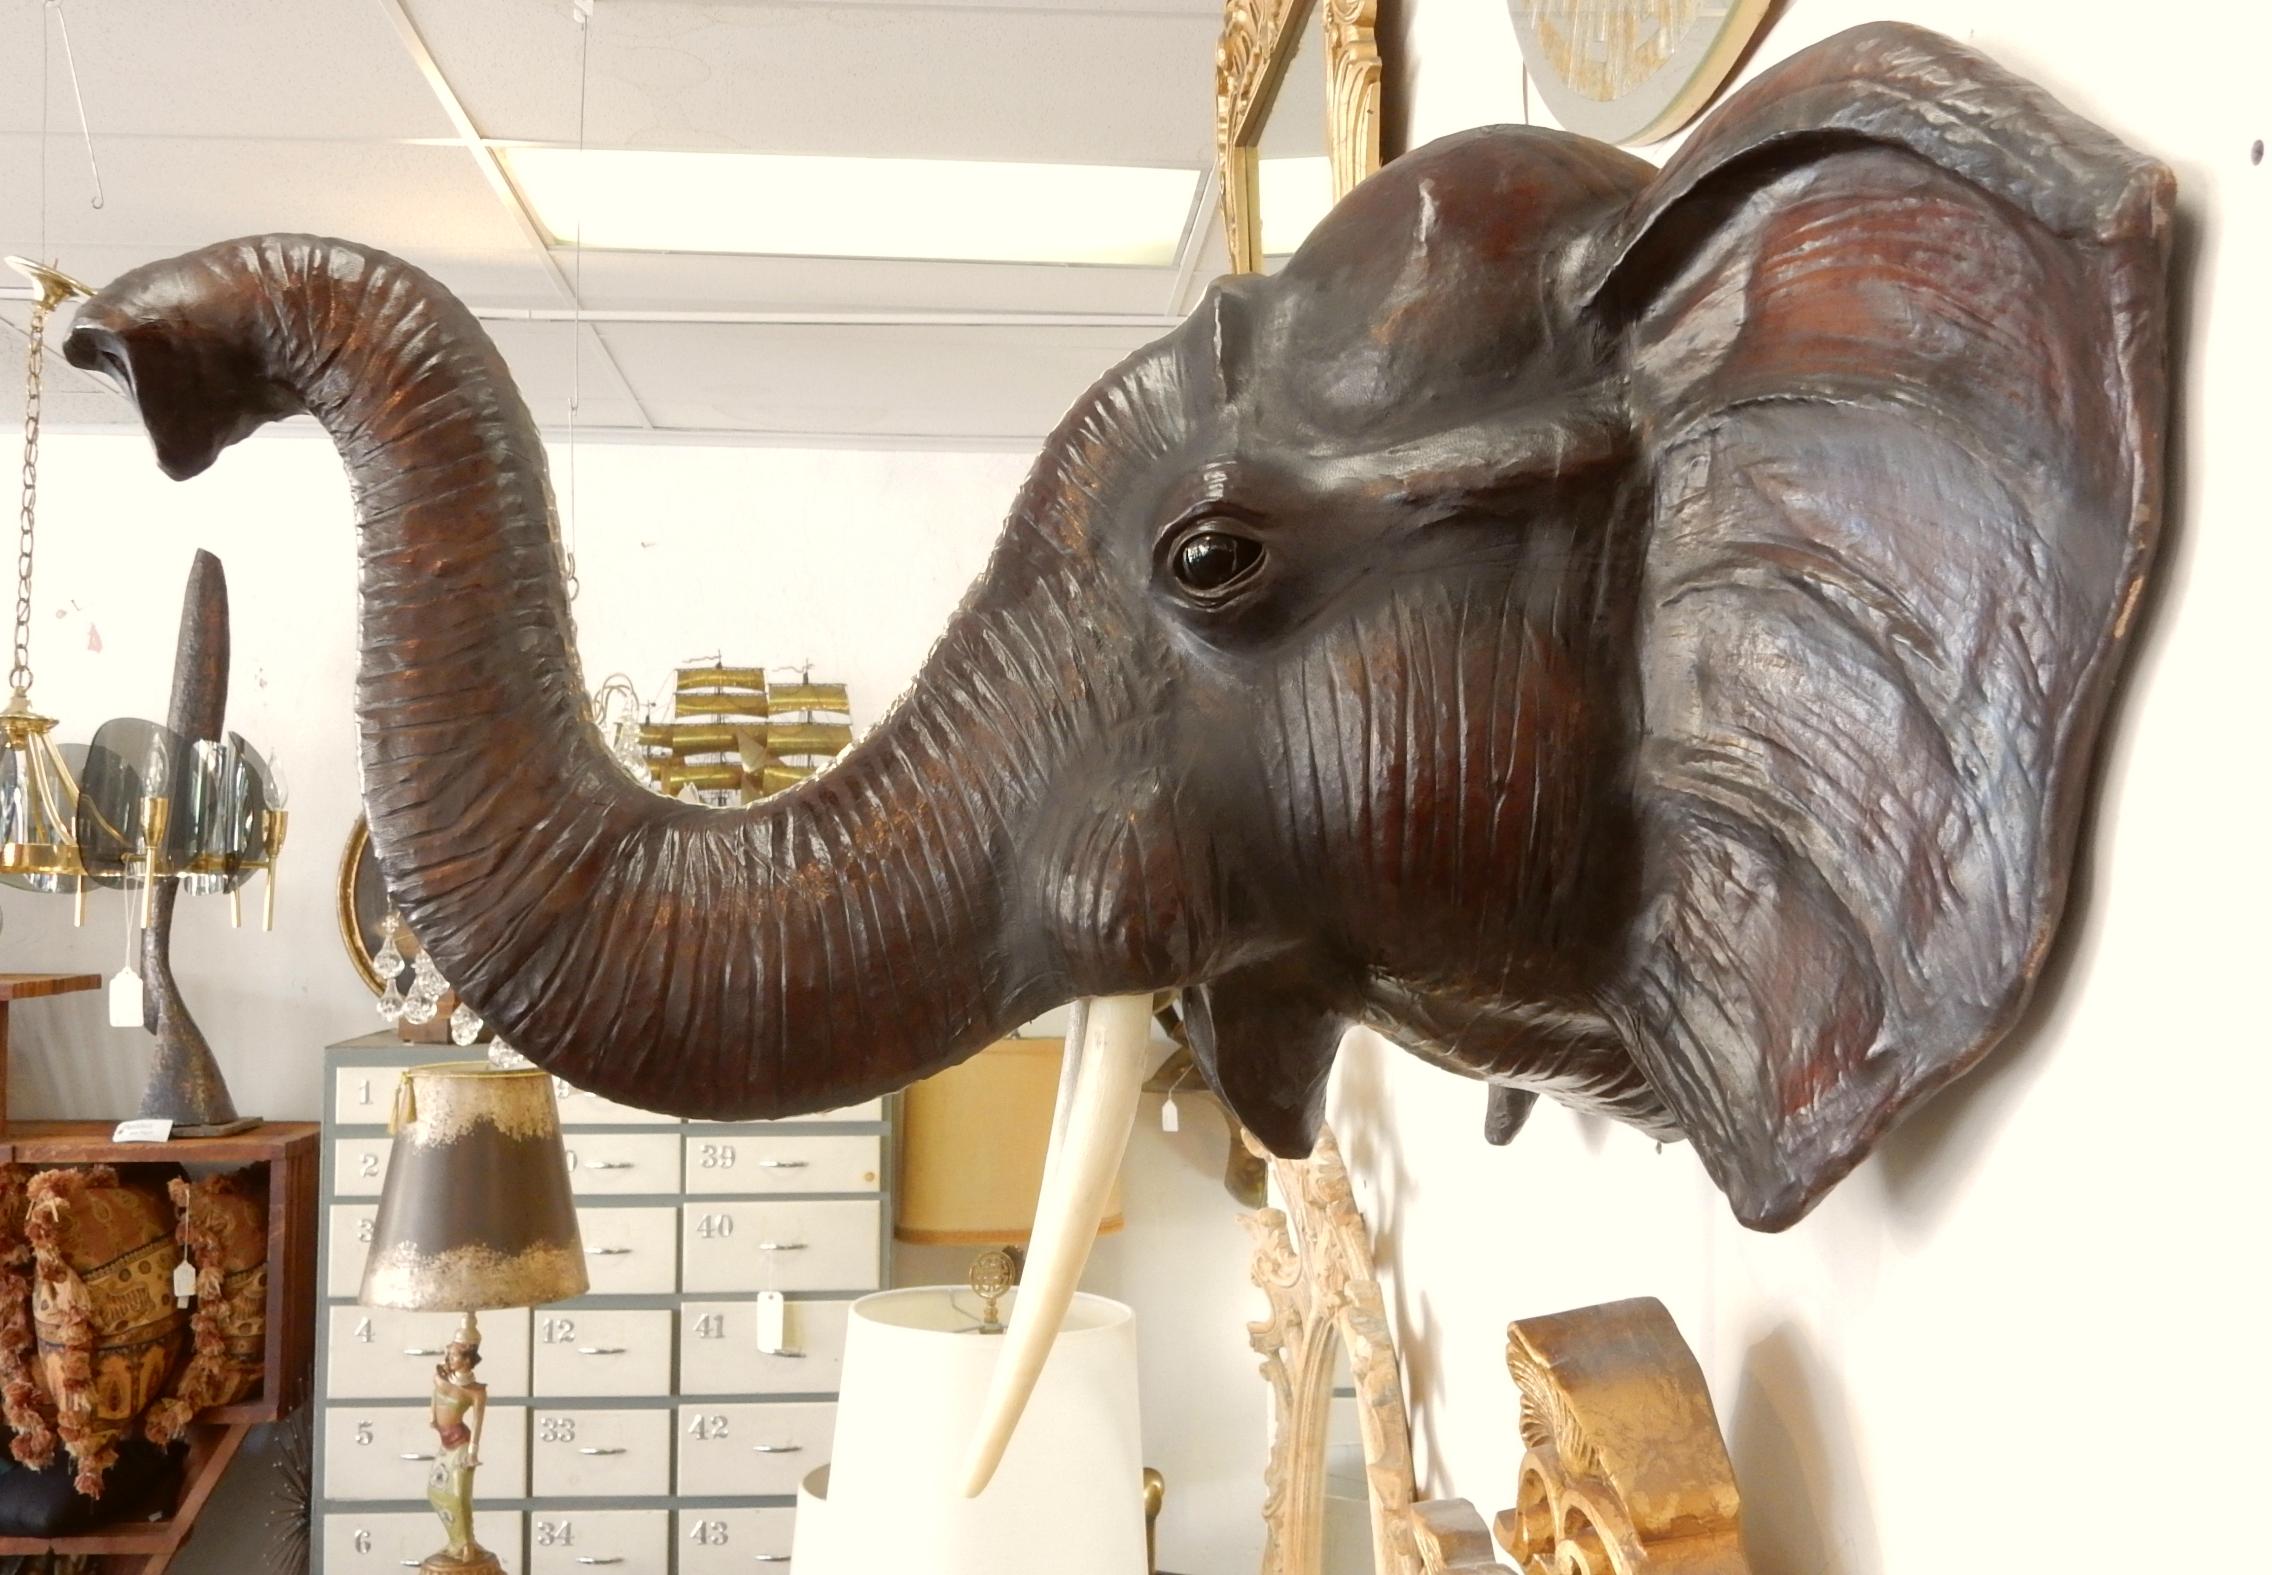 Perfect exotic eclectic decor piece for a large space.
This life sized elephant bust is adroitly clad in leather parchment over a wood form.
Fine realistic features include glass eyes and faux ivory tusks,
circa 1960s, not marked or signed by